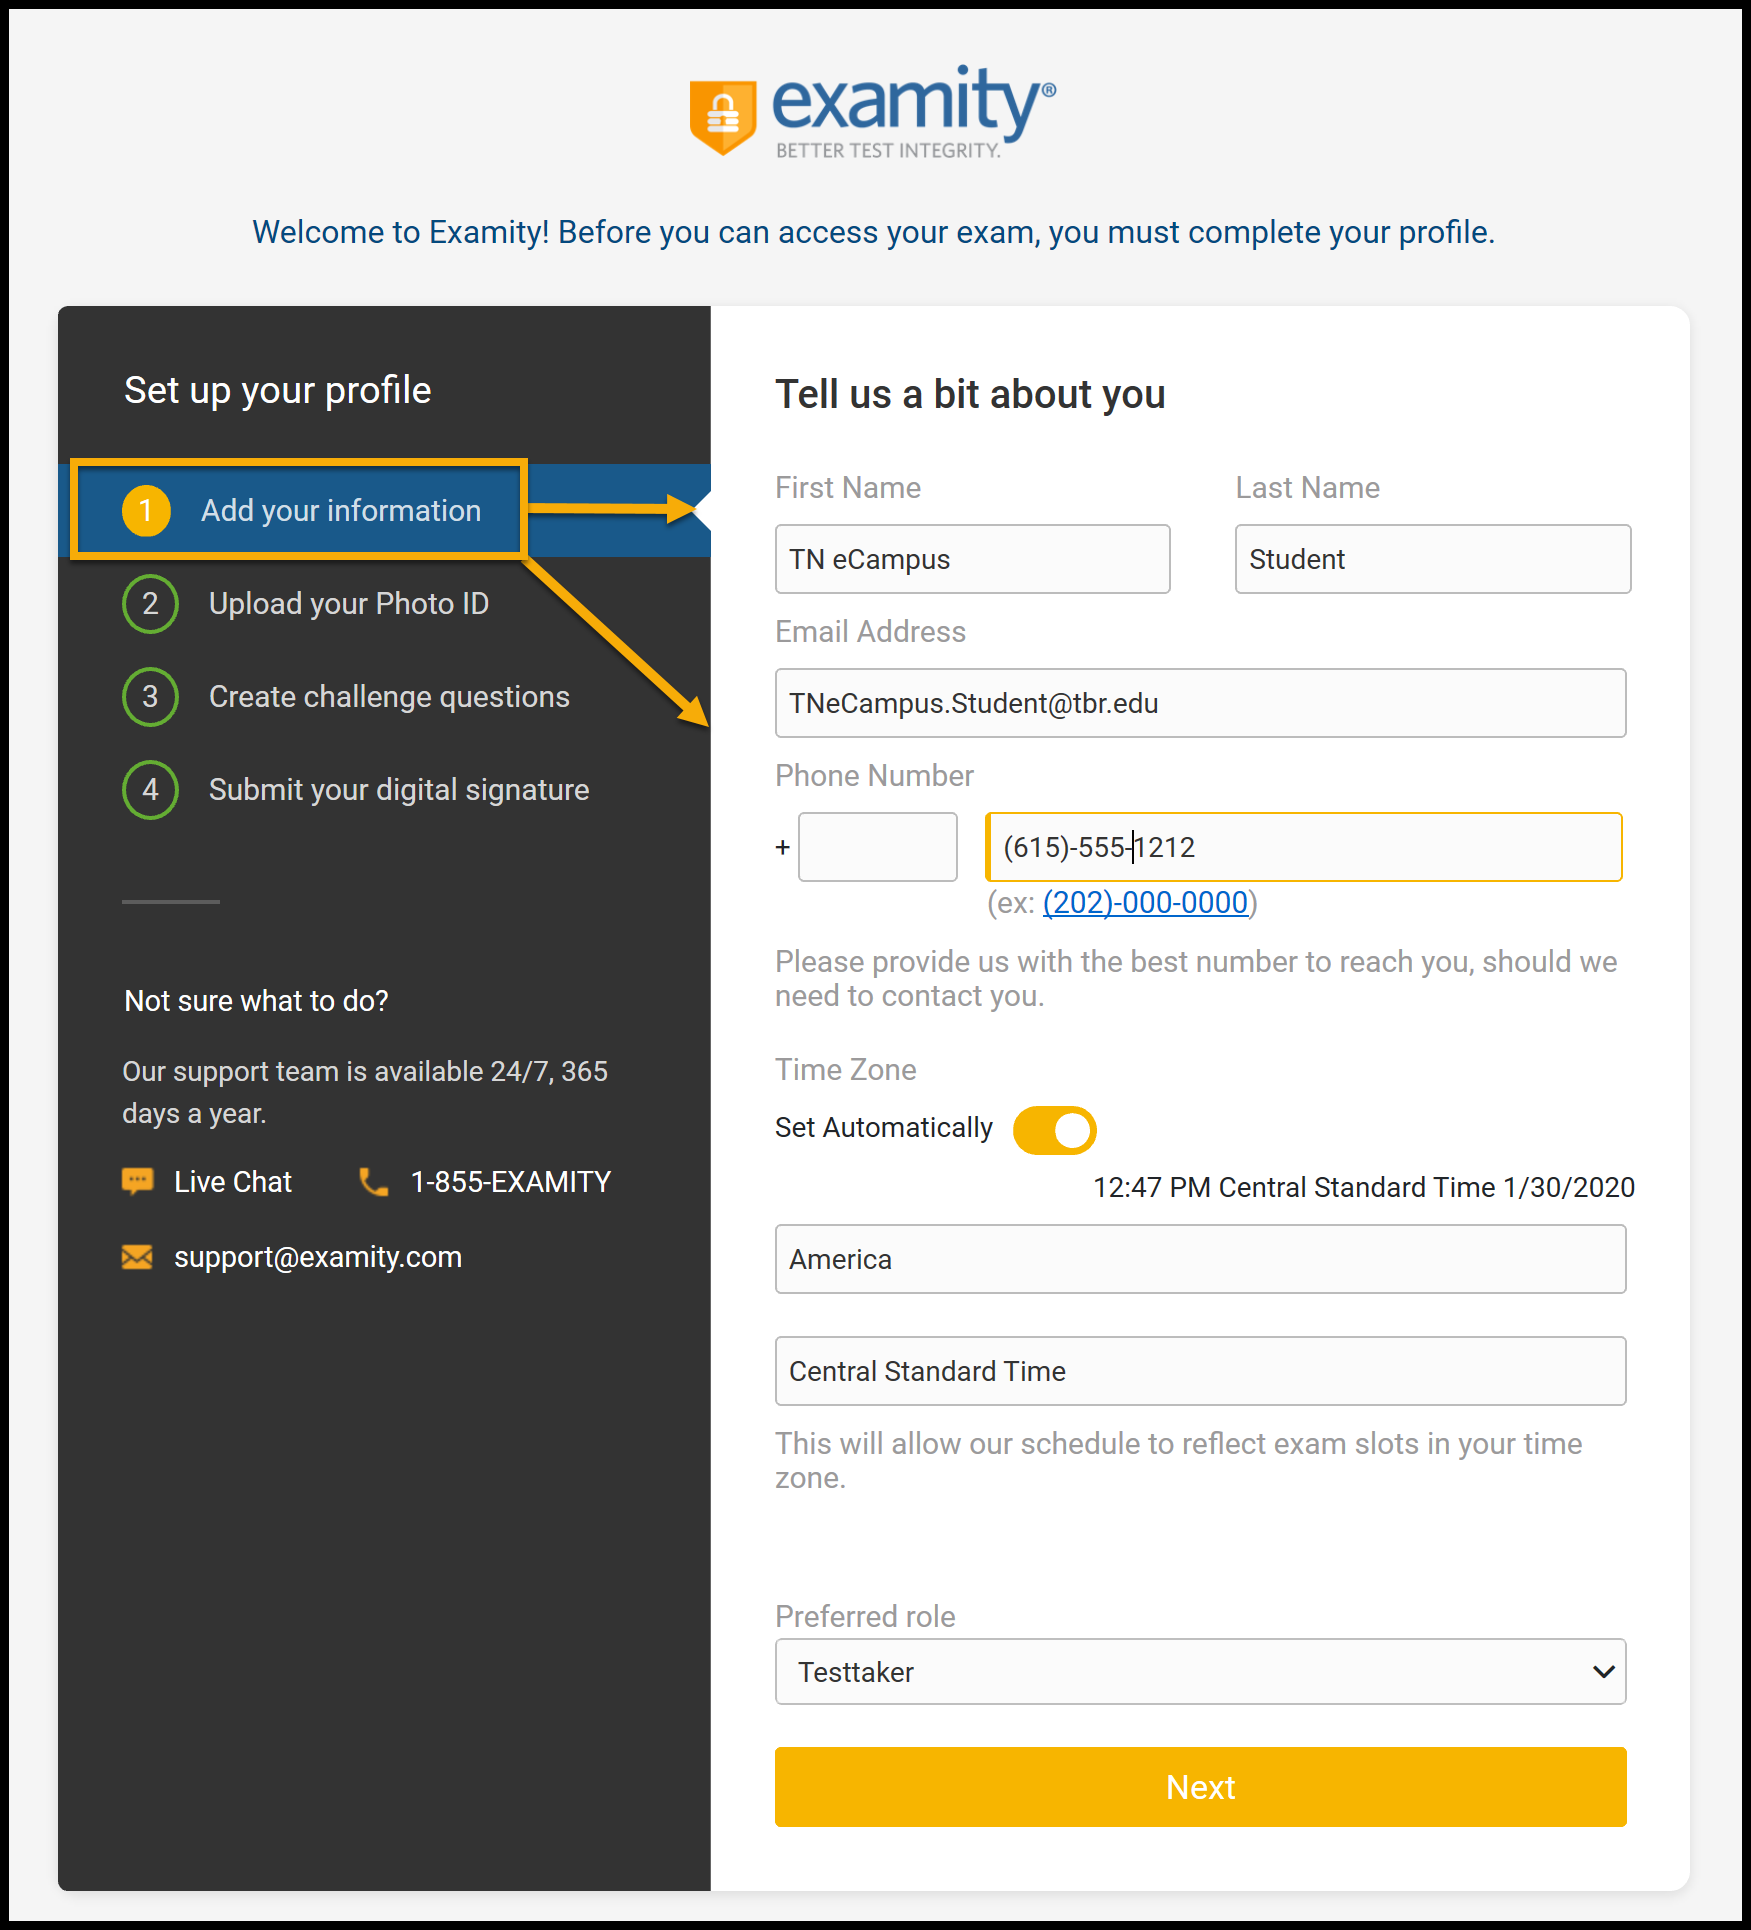 Examity welcome page for Set up your profile. Add Your Information expanded to prompt pesonal information.